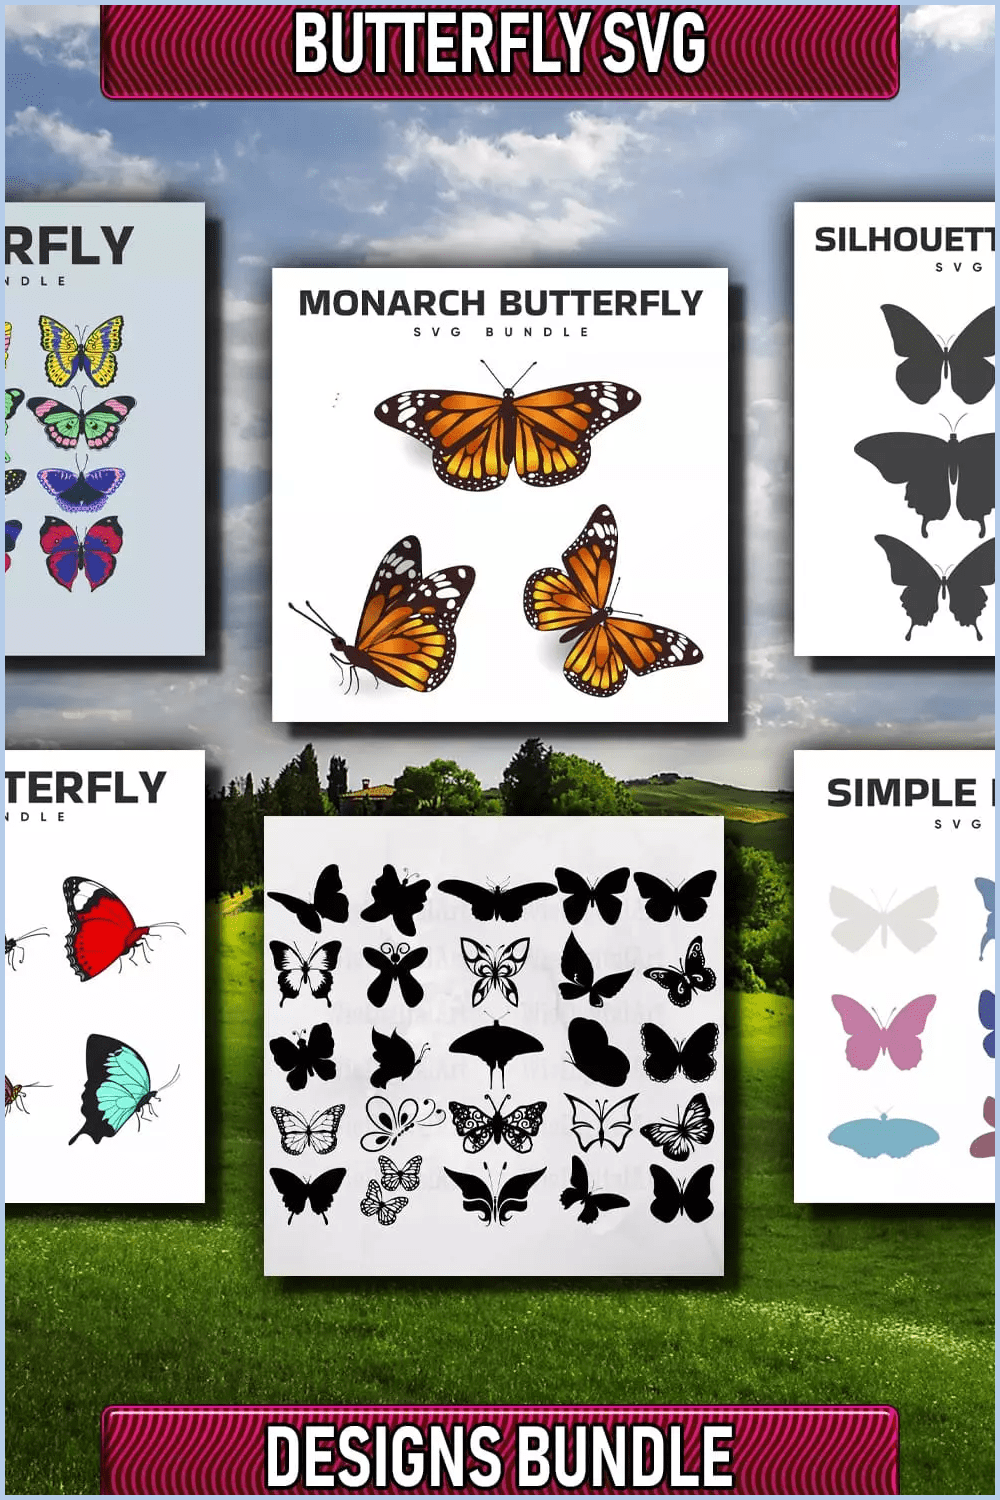 Collage with images of butterflies.